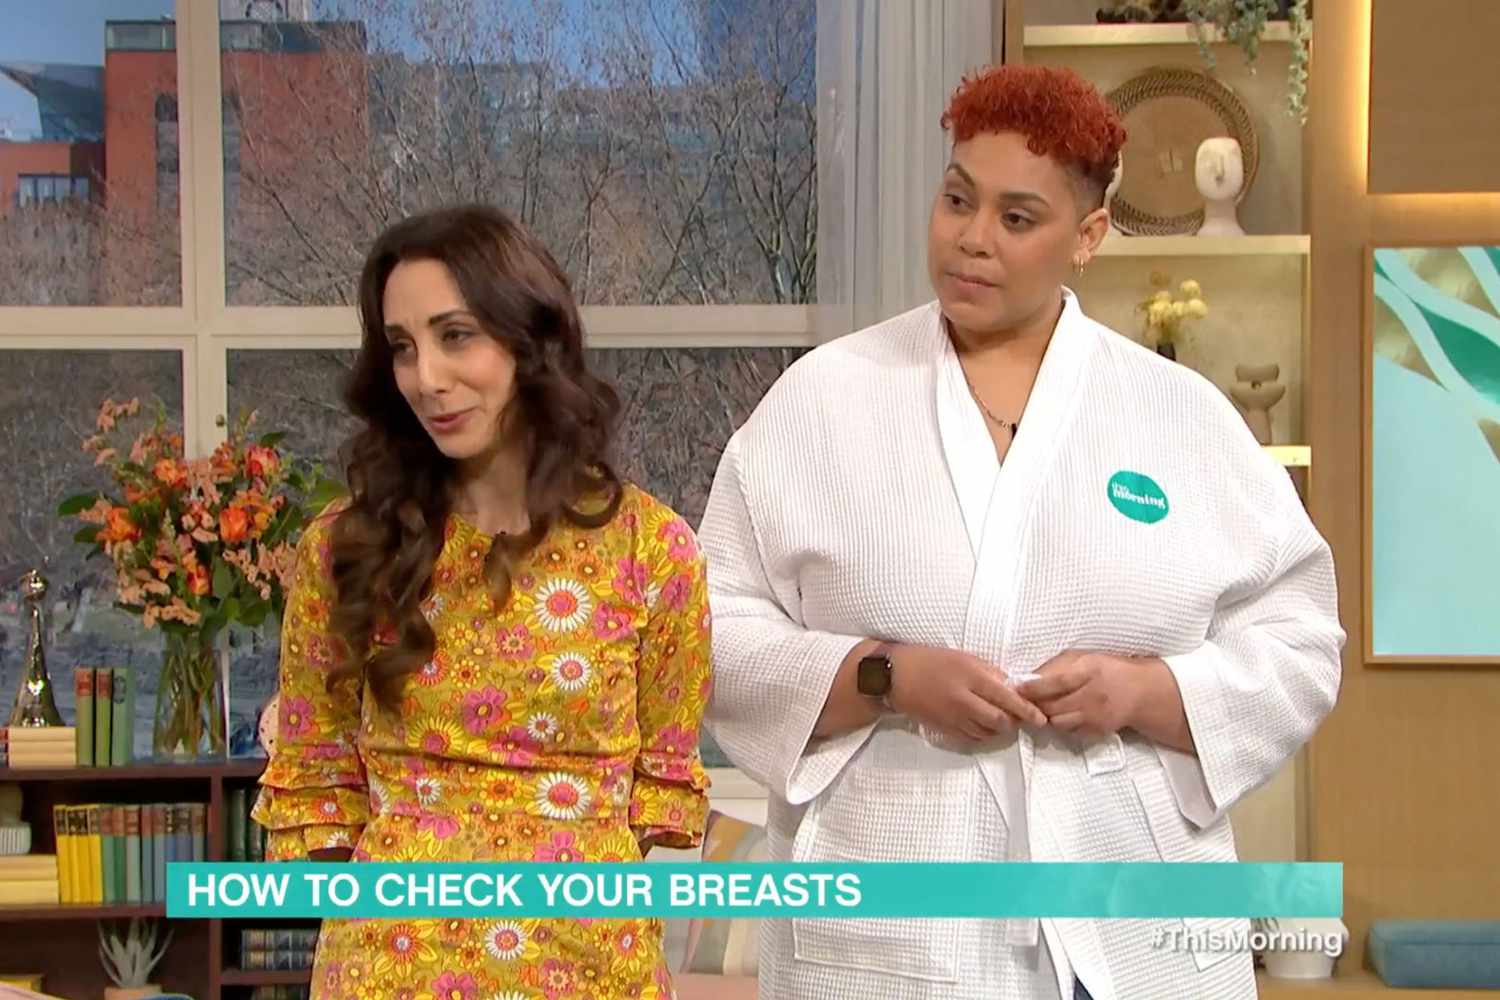 aubrey brewster recommends women showing their breast in public pic